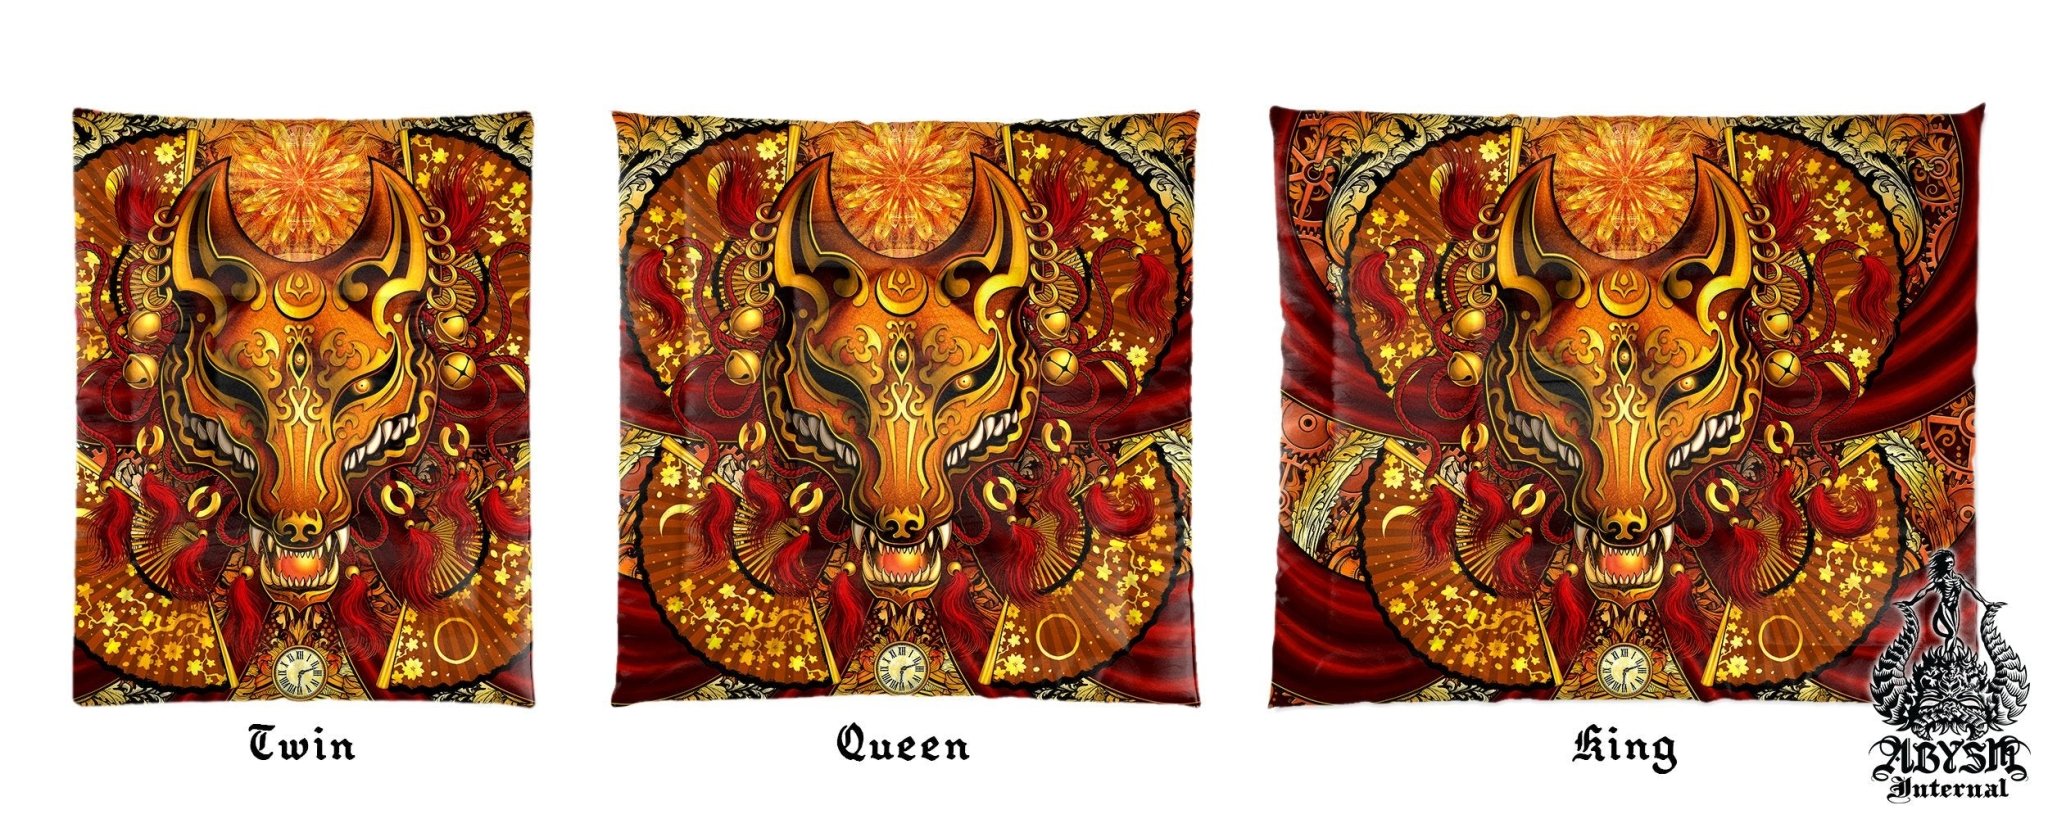 Kitsune Mask Bedding Set, Comforter and Duvet, Fox Okami and Anime Bed Cover and Bedroom Decor, King, Queen and Twin Size - Steampunk, Red - Abysm Internal